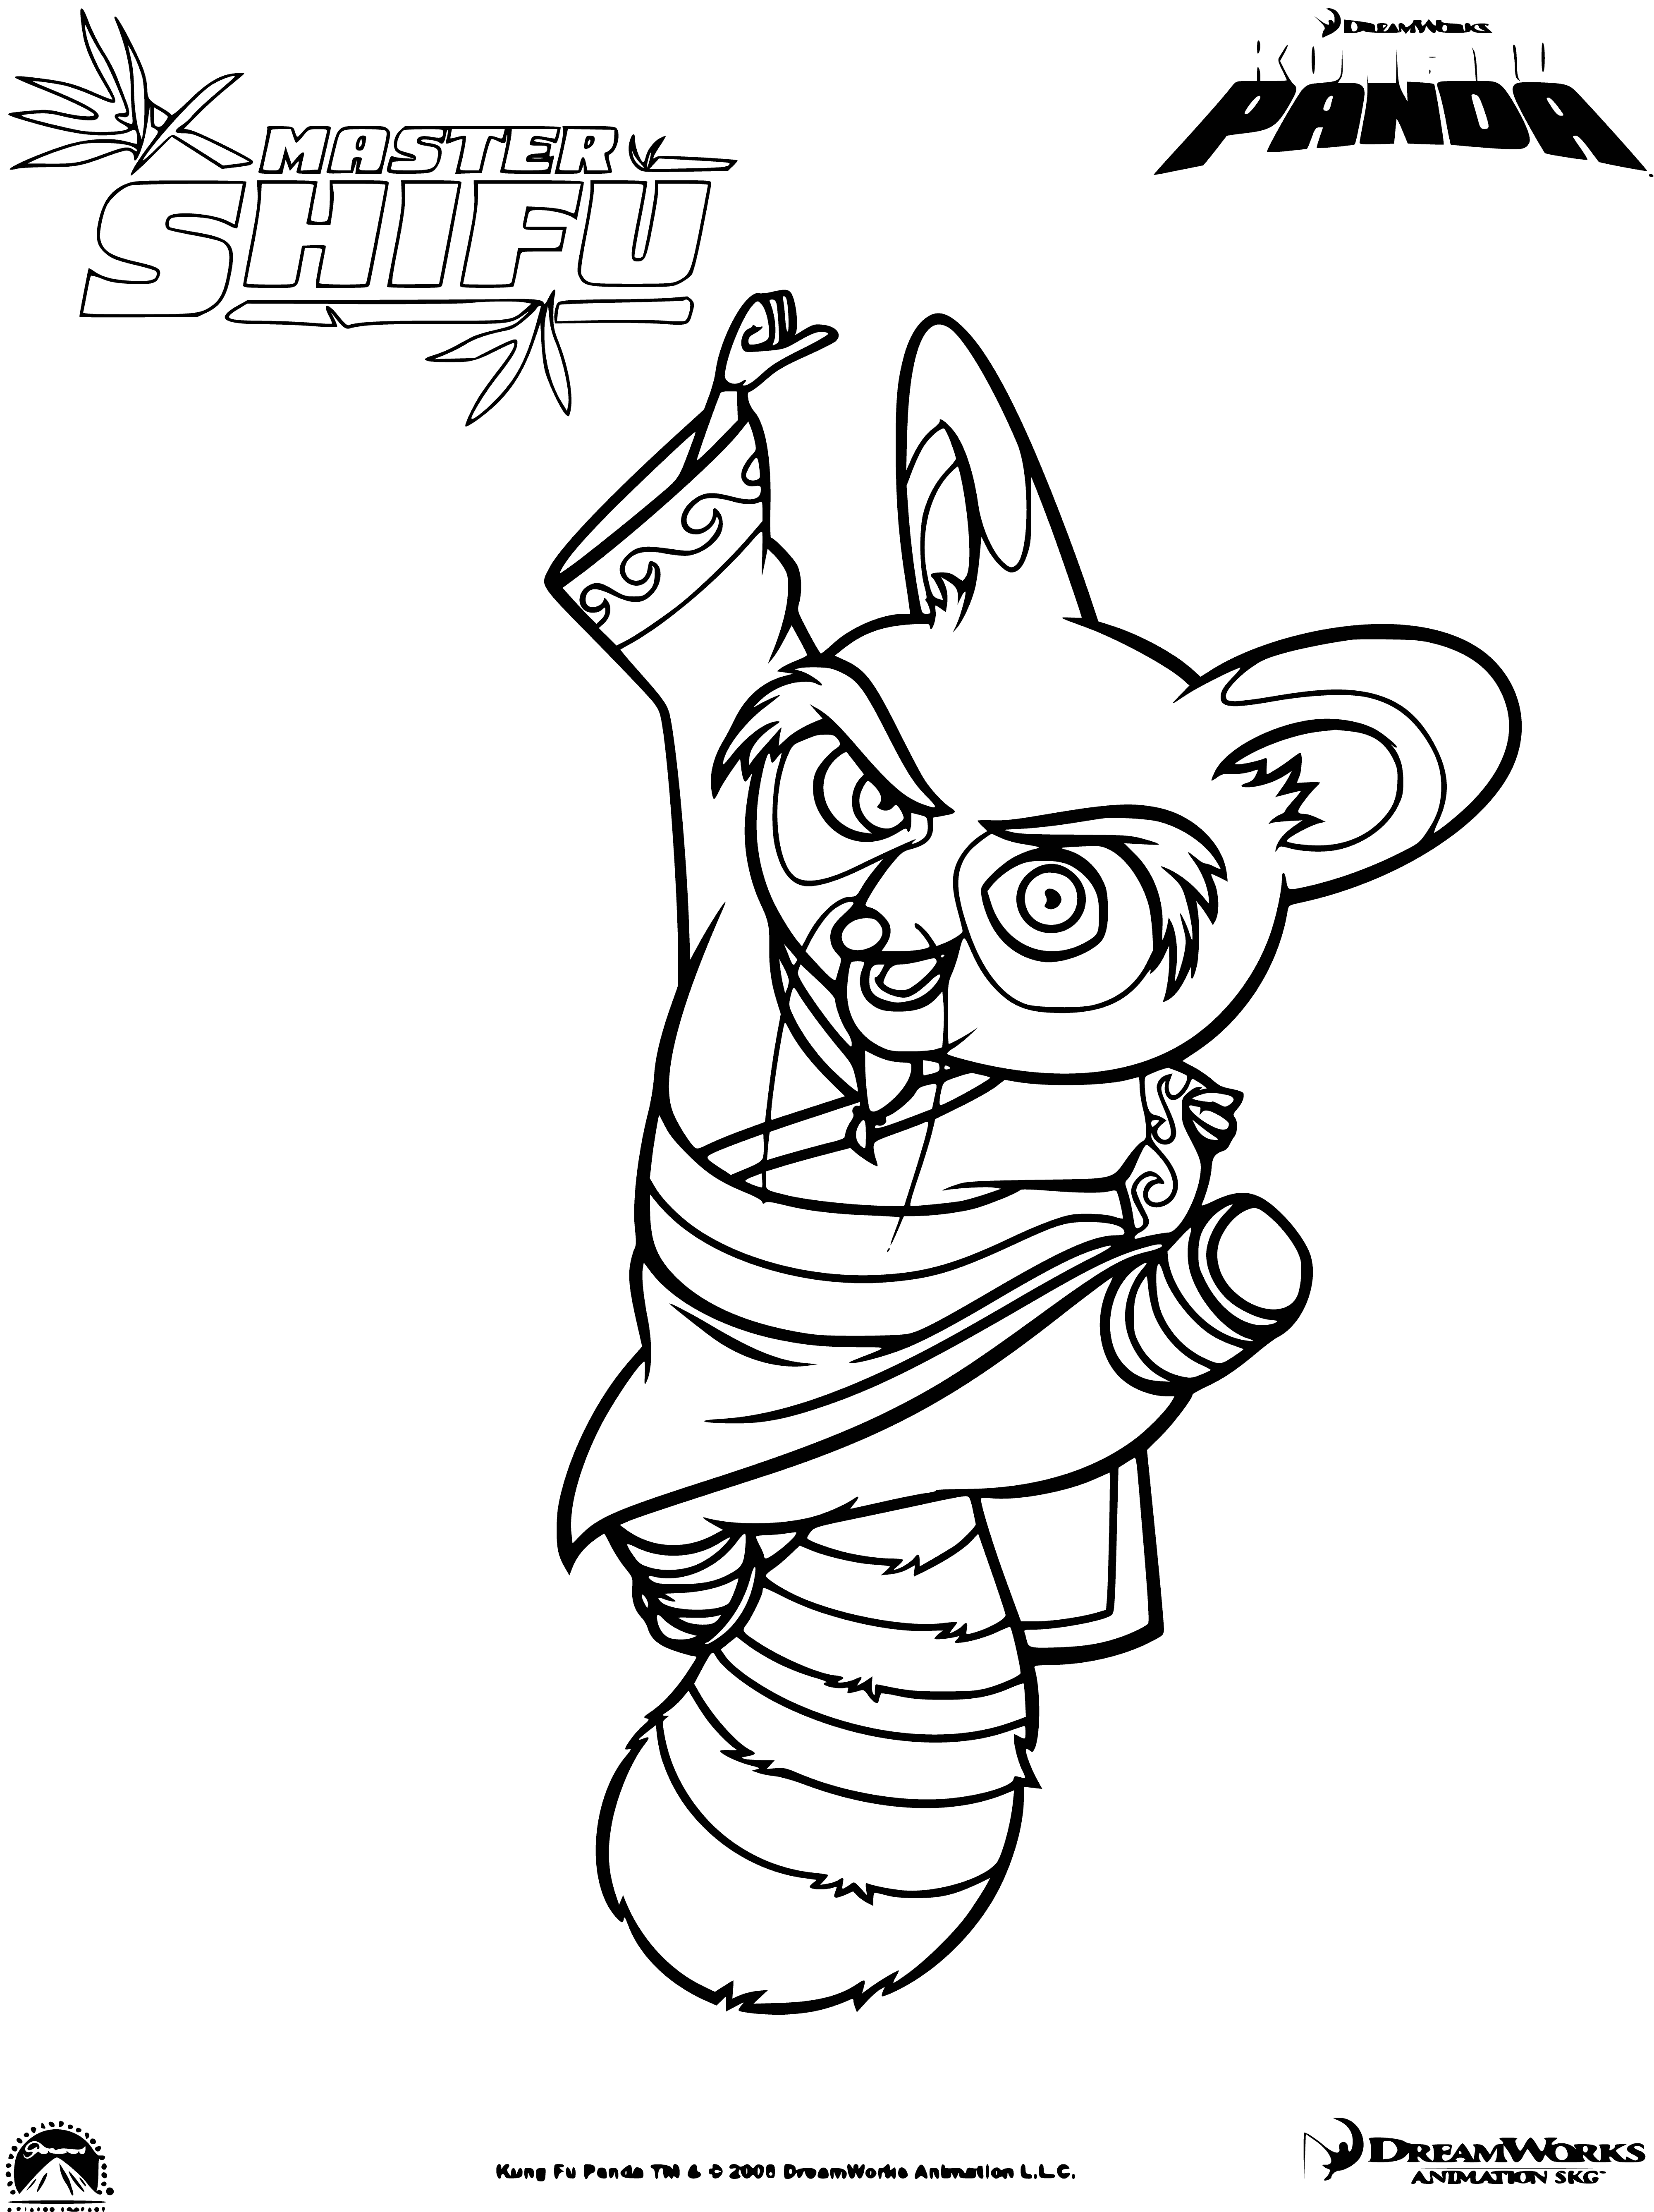 coloring page: Master Shifu is a martial arts master, seeking to improve his fighting & teaching skills to help others learn Kung Fu.